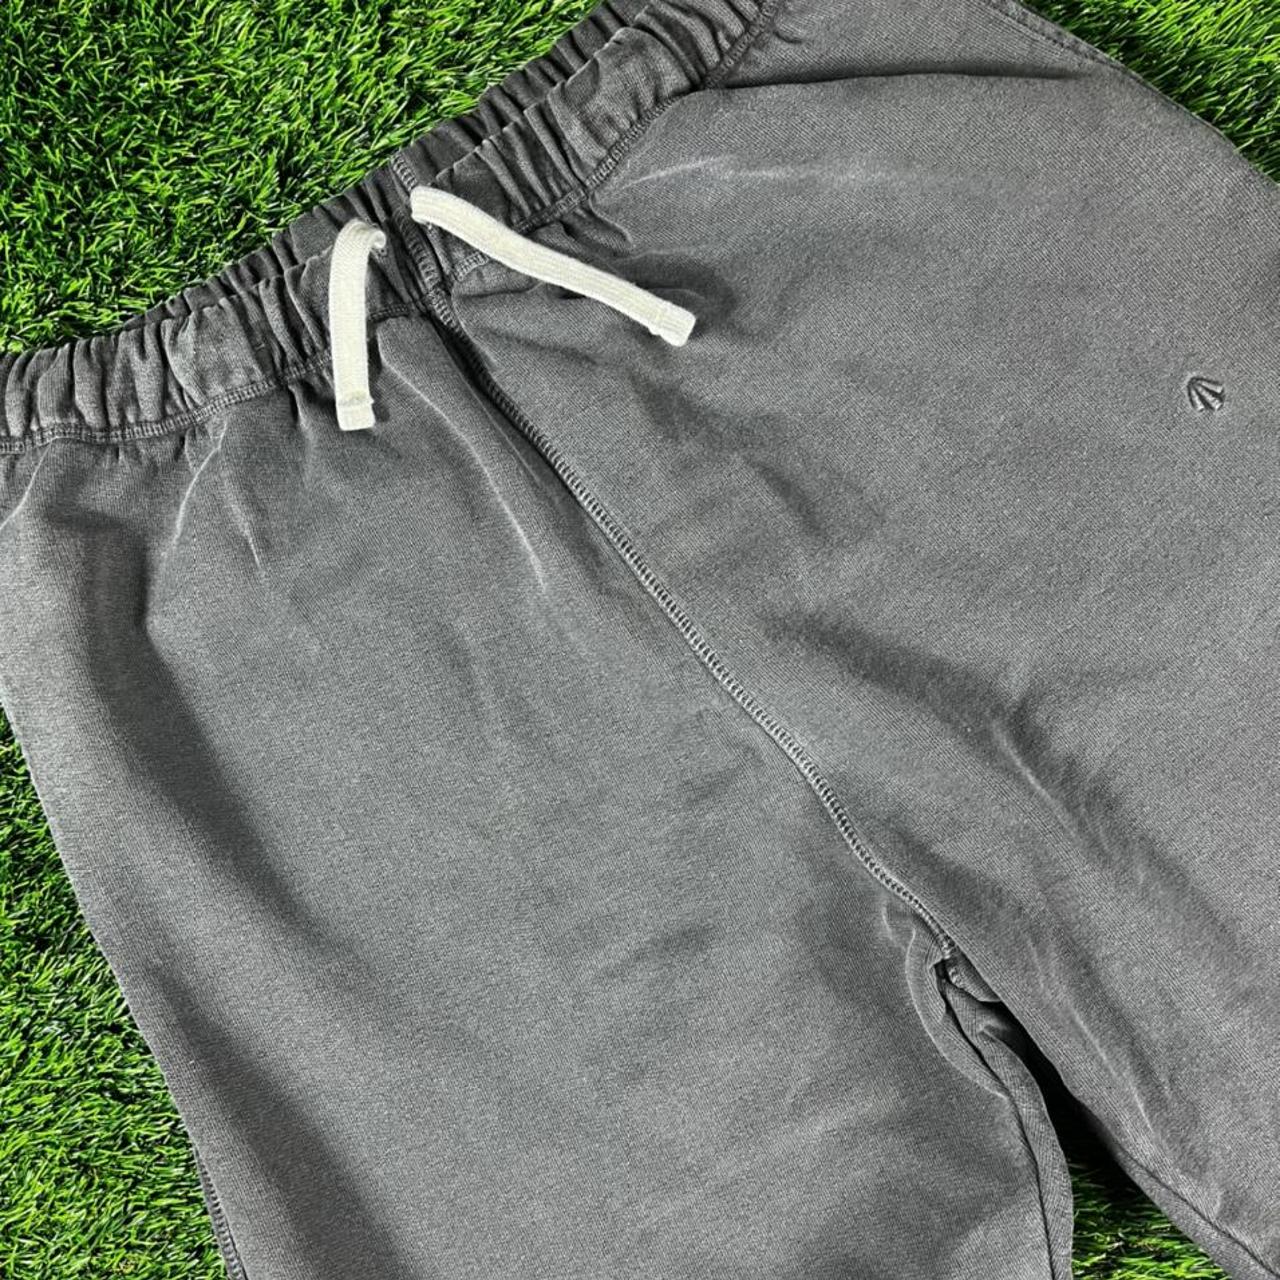 Product Image 3 - Nigel Cabourn Sweatpants

From "The Army